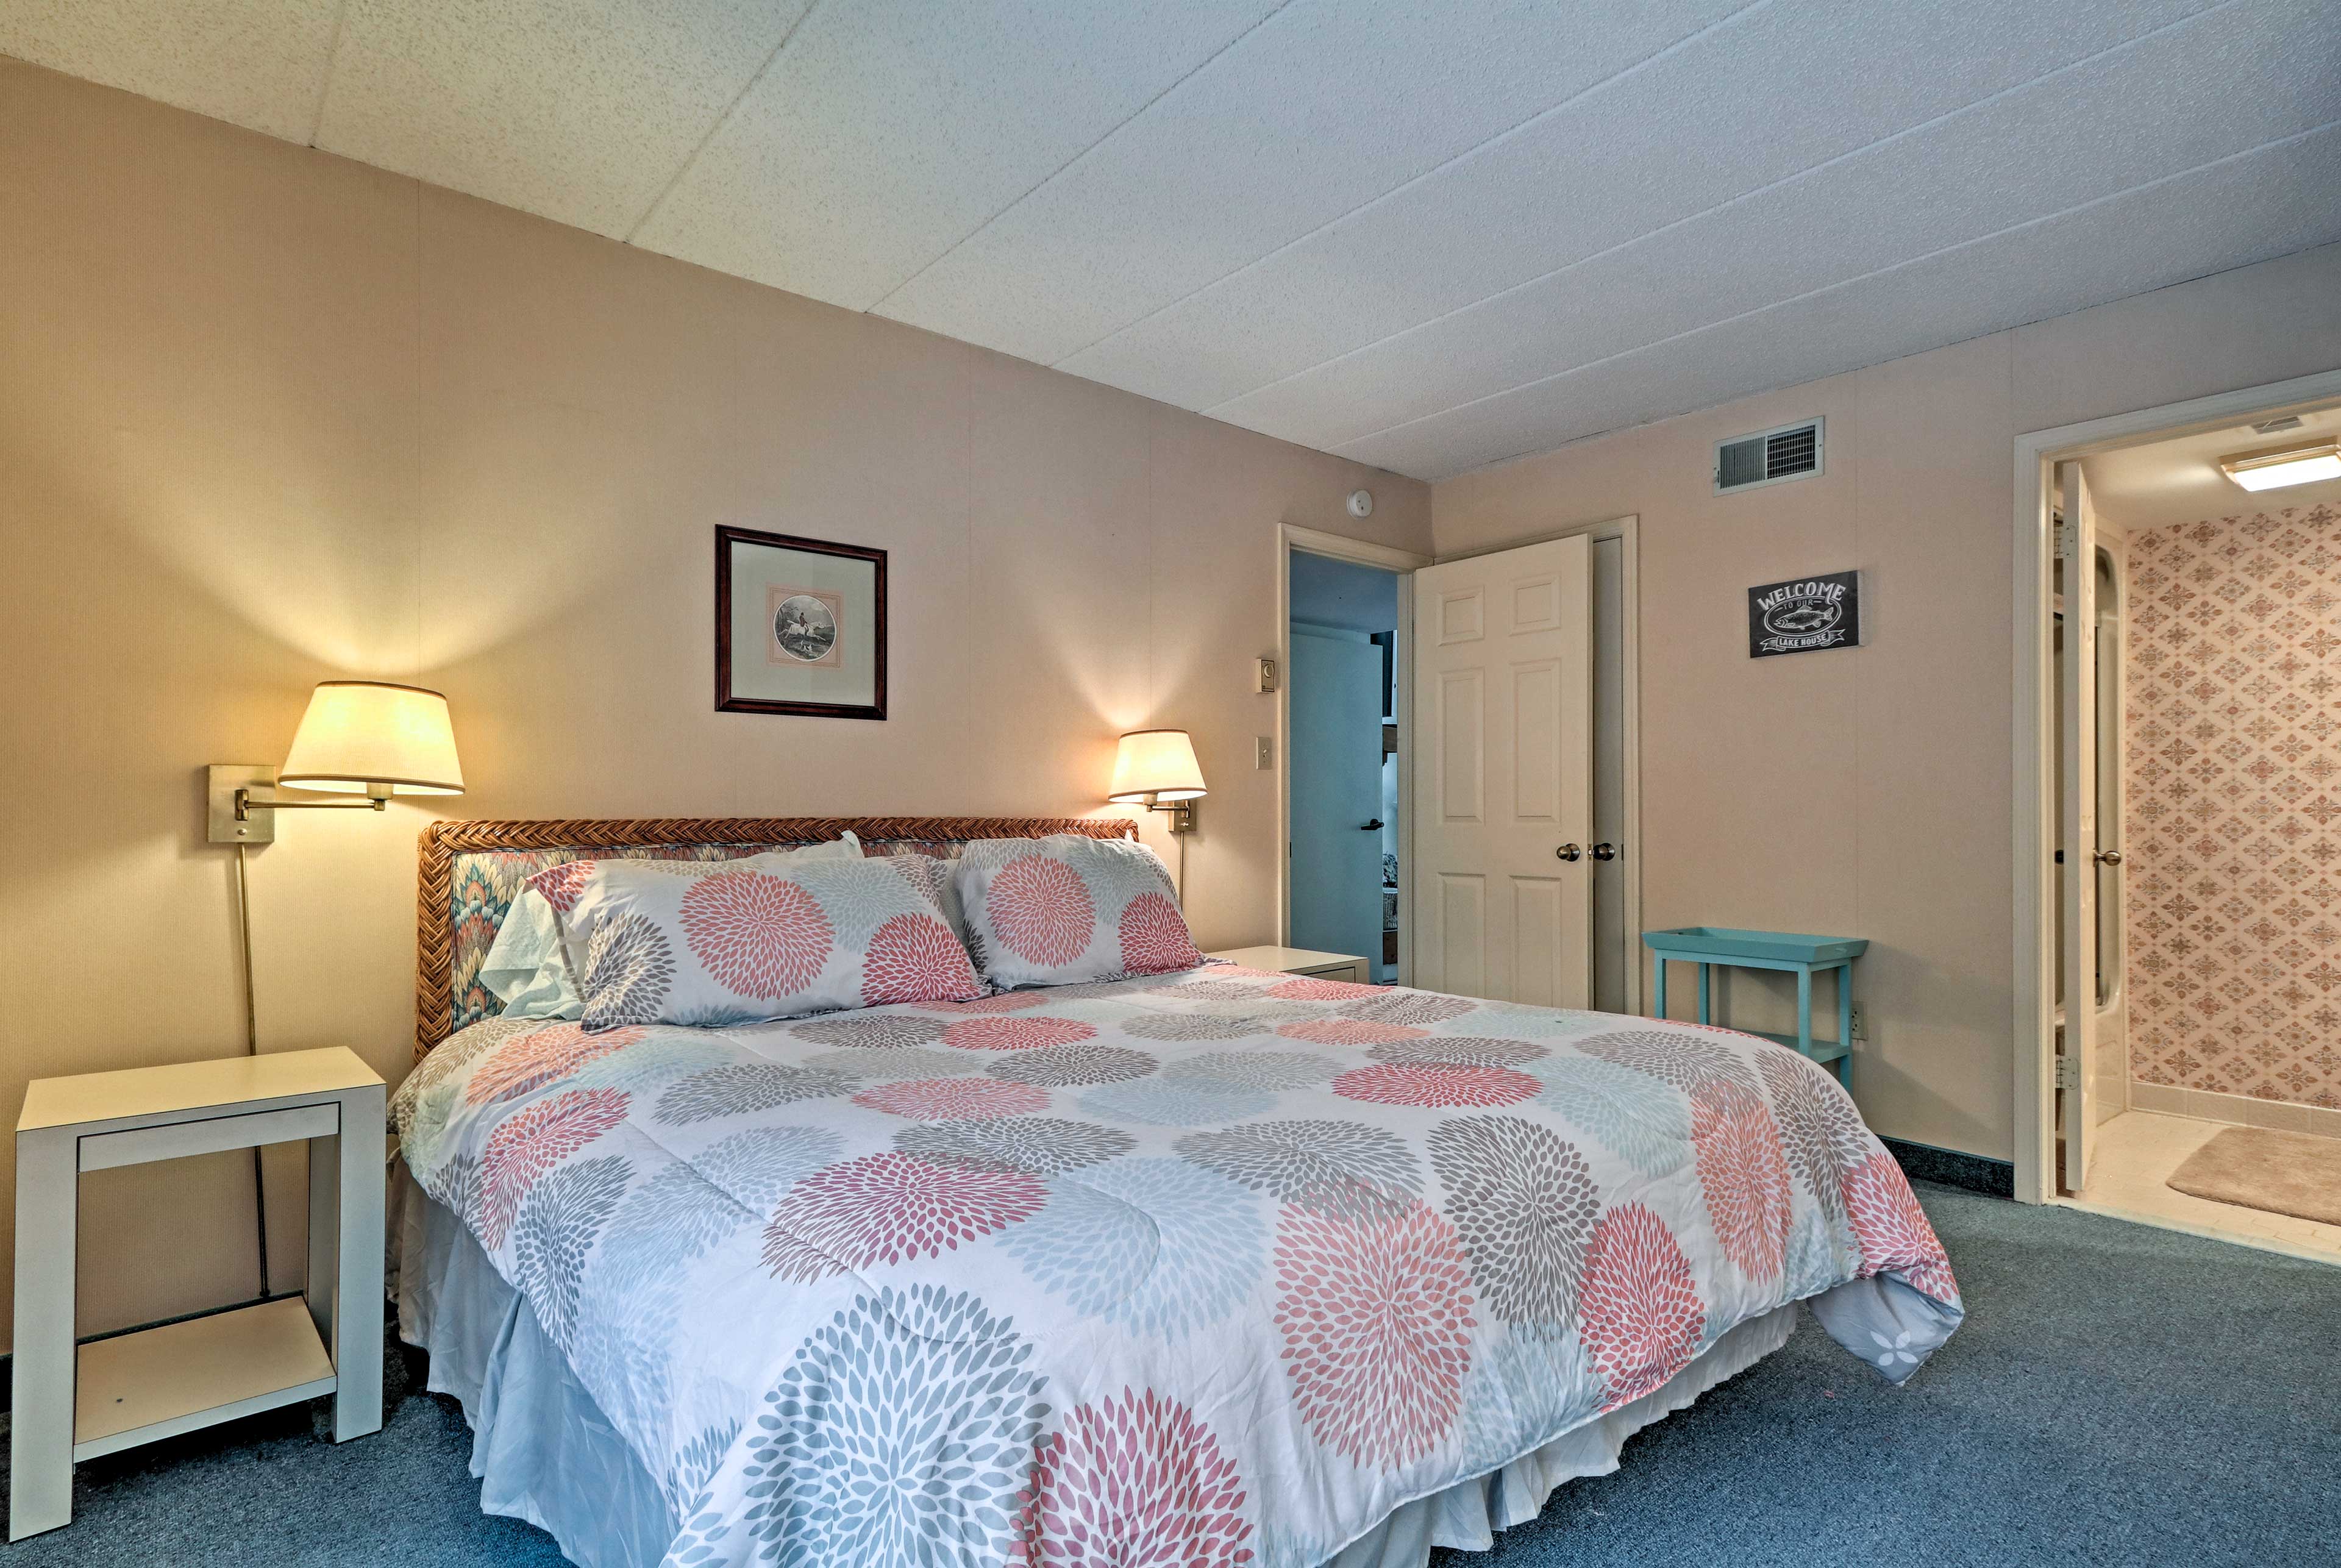 Comfortably fall asleep in one of the 2 spacious bedrooms.